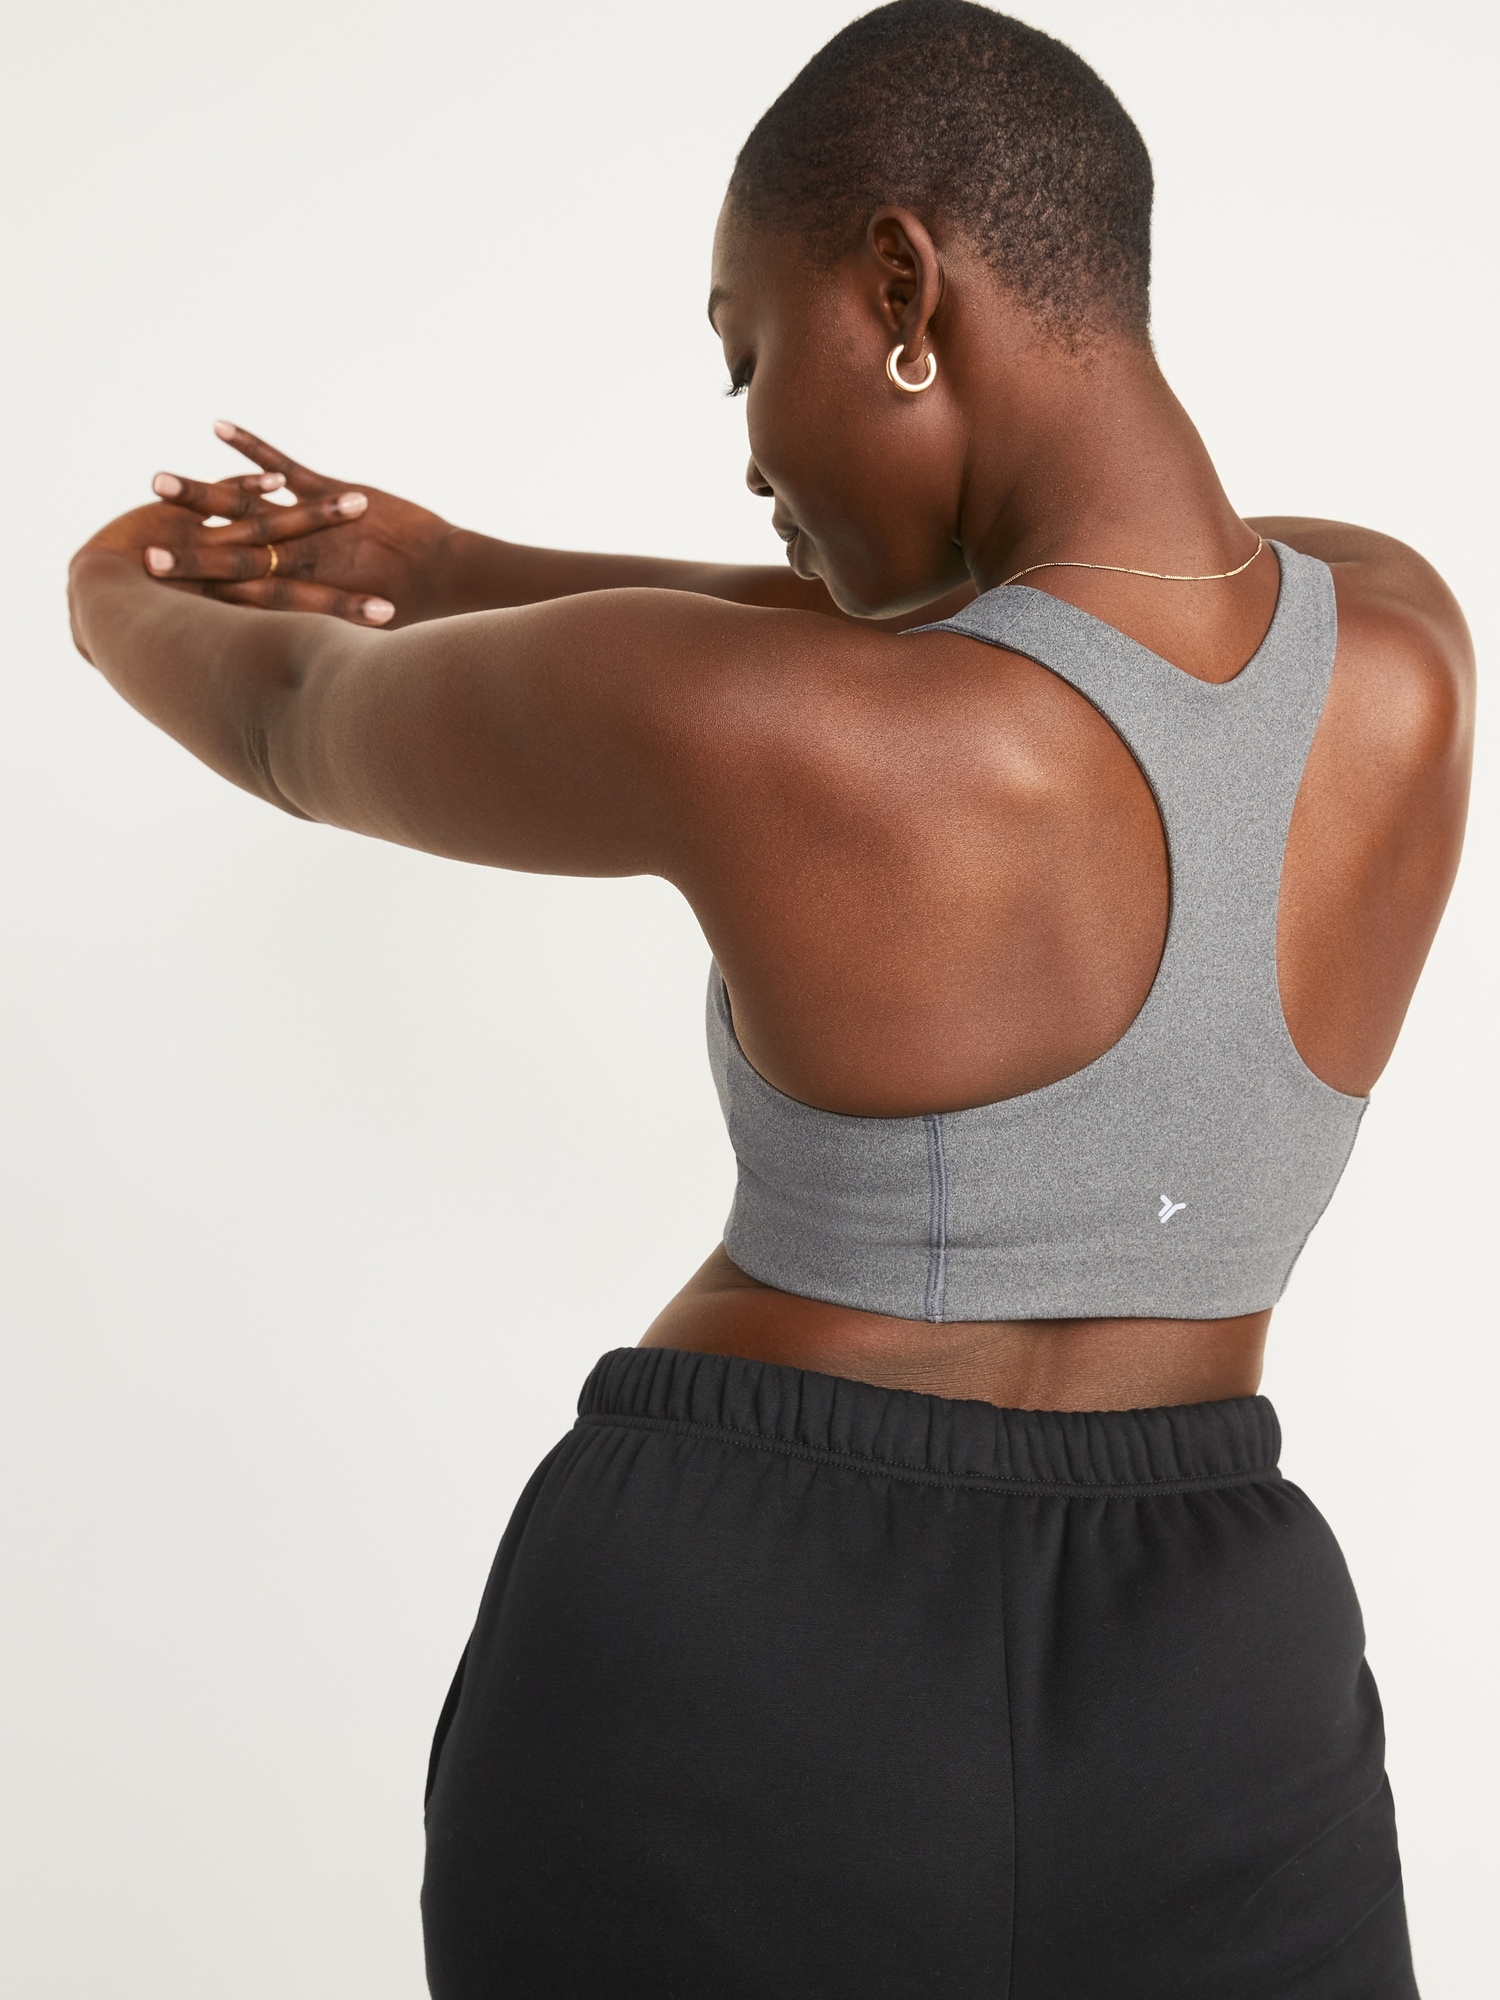 Medium Support Racerback Sports Bra for Women by Old Navy - Proud Mary